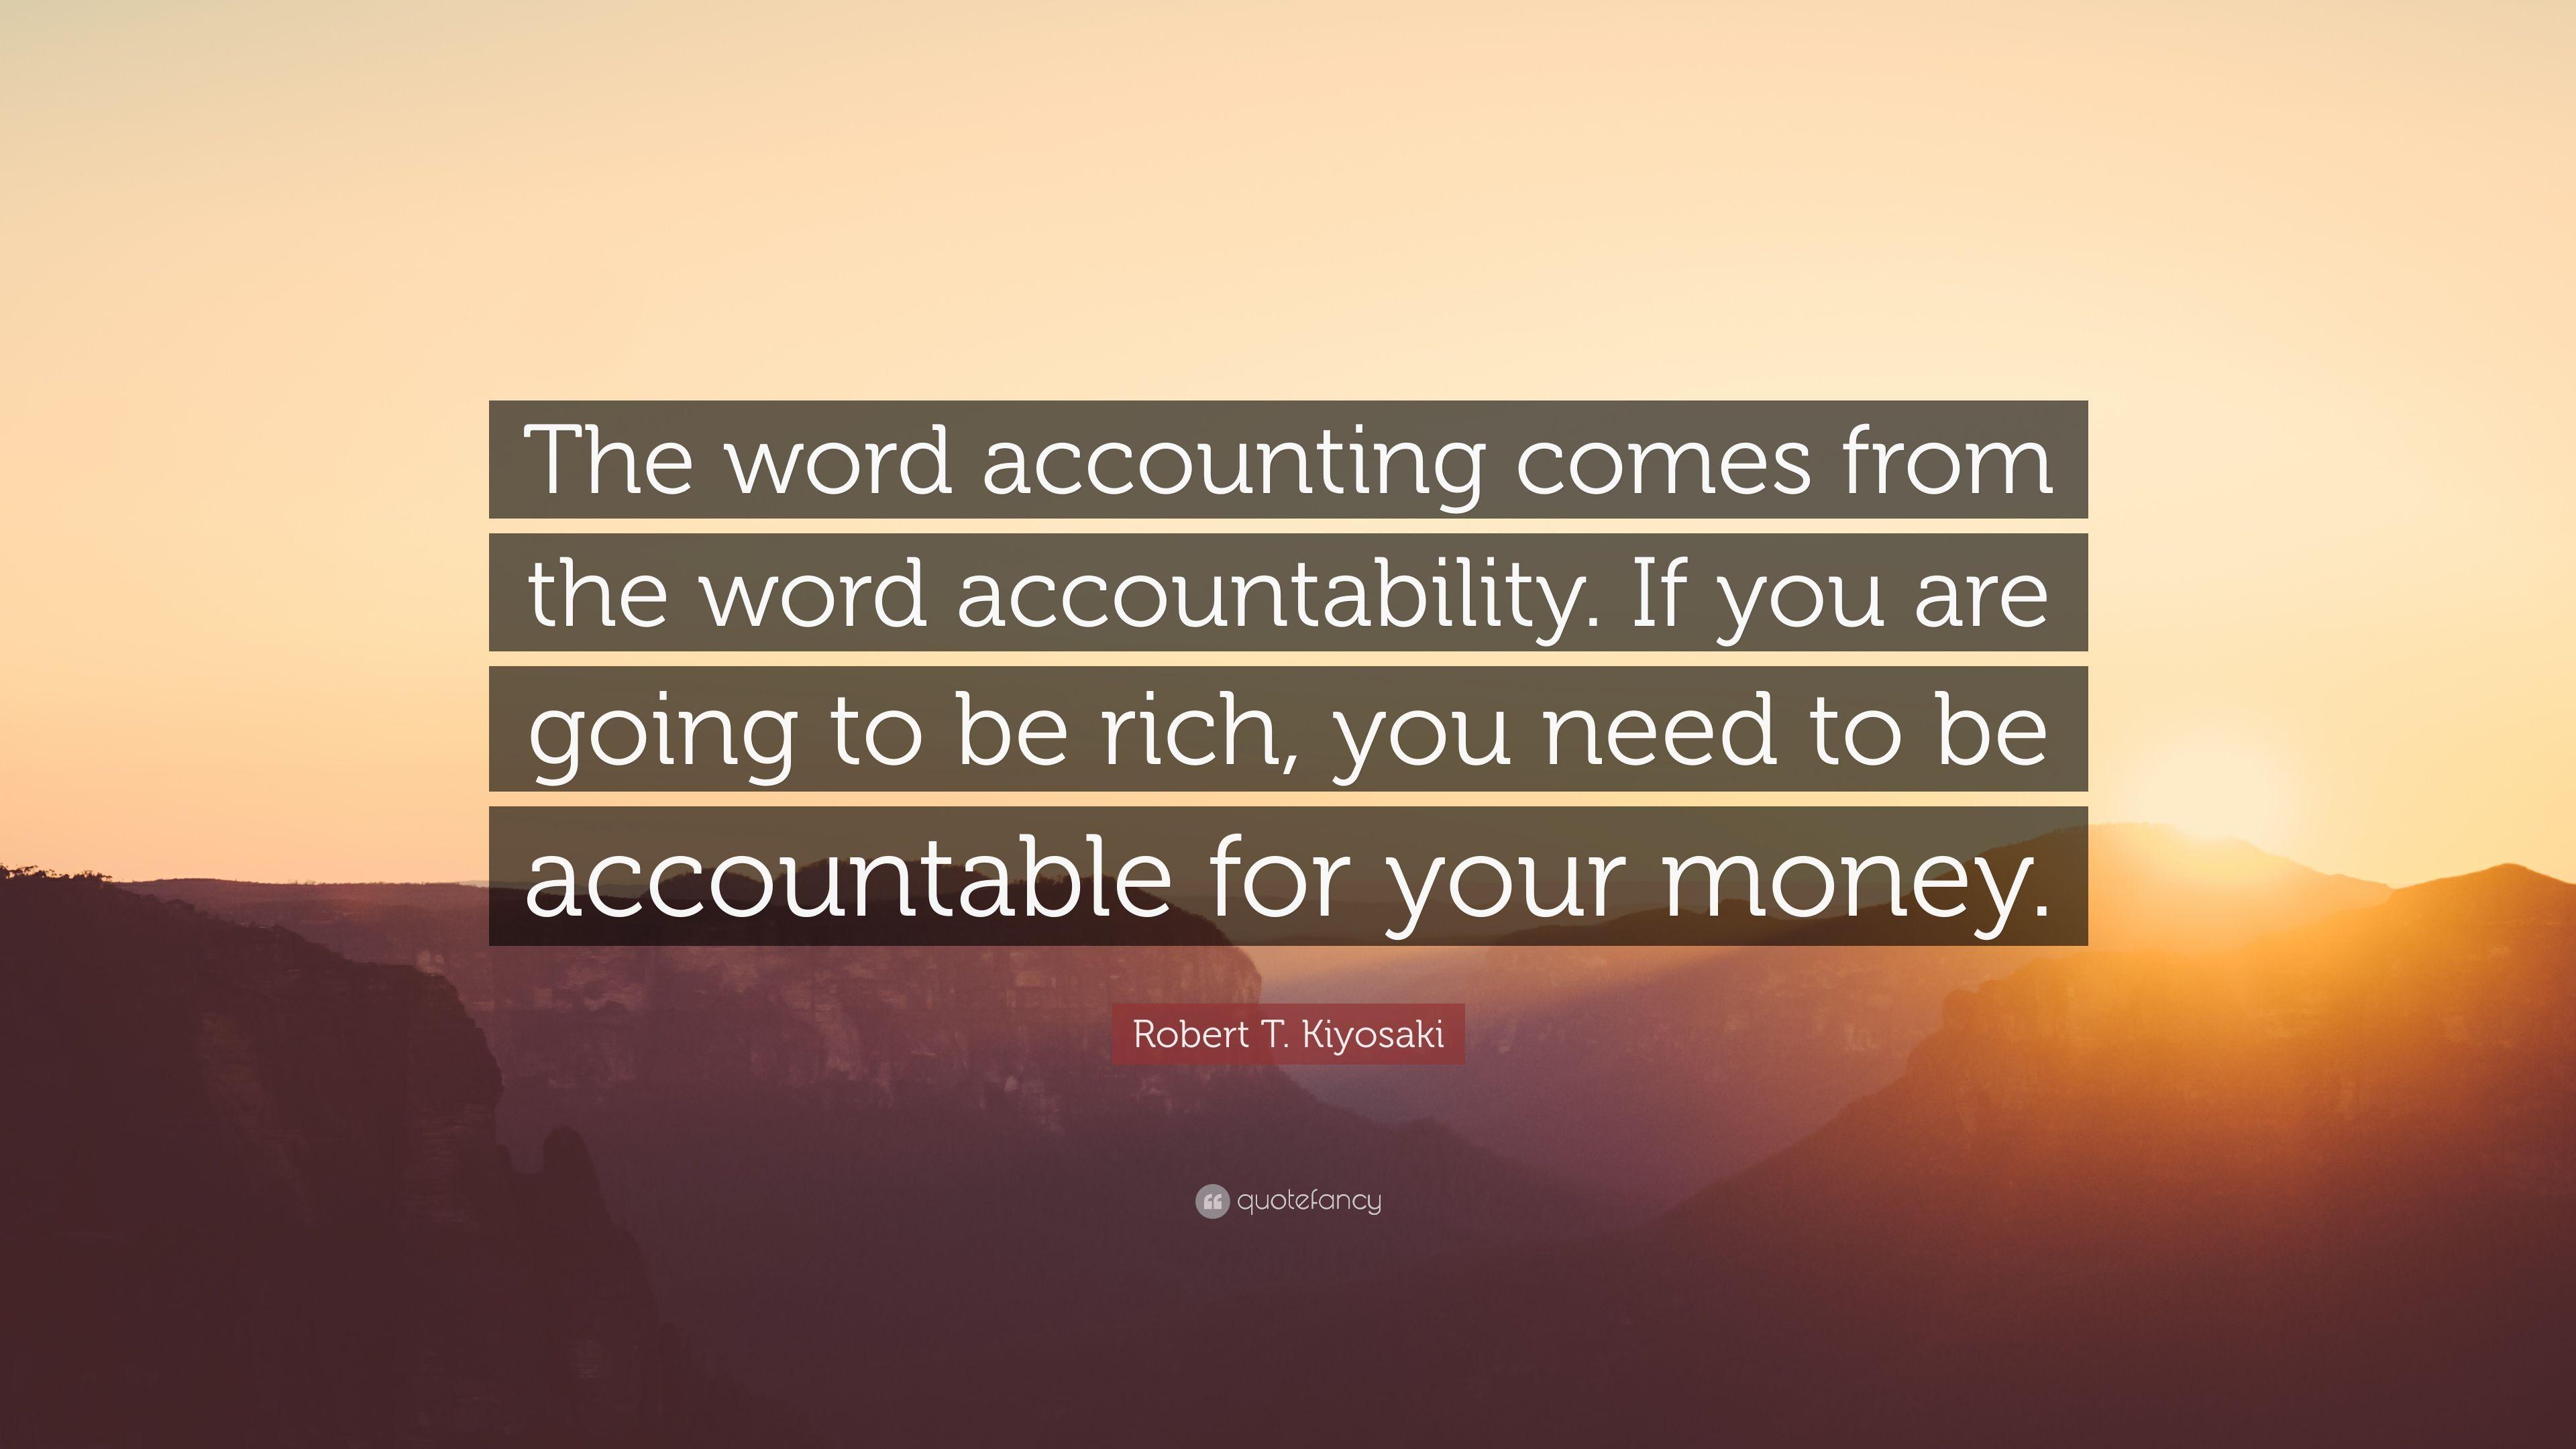 Robert T. Kiyosaki Quote: “The word accounting comes from the word